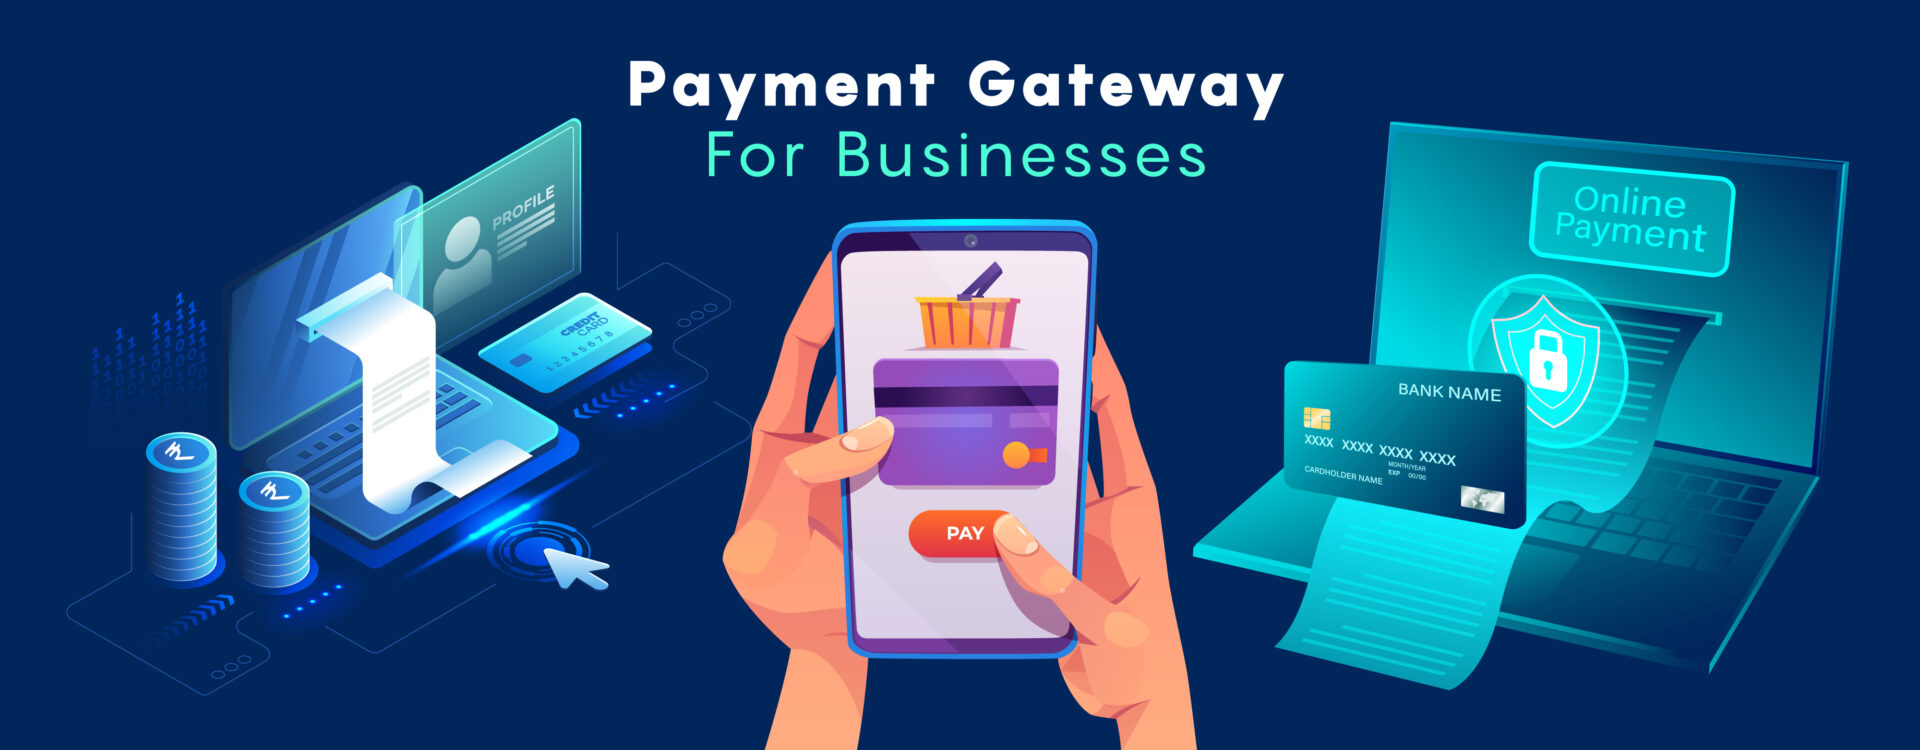 Payment Gateway and Small Businesses - Learn What Is Happening